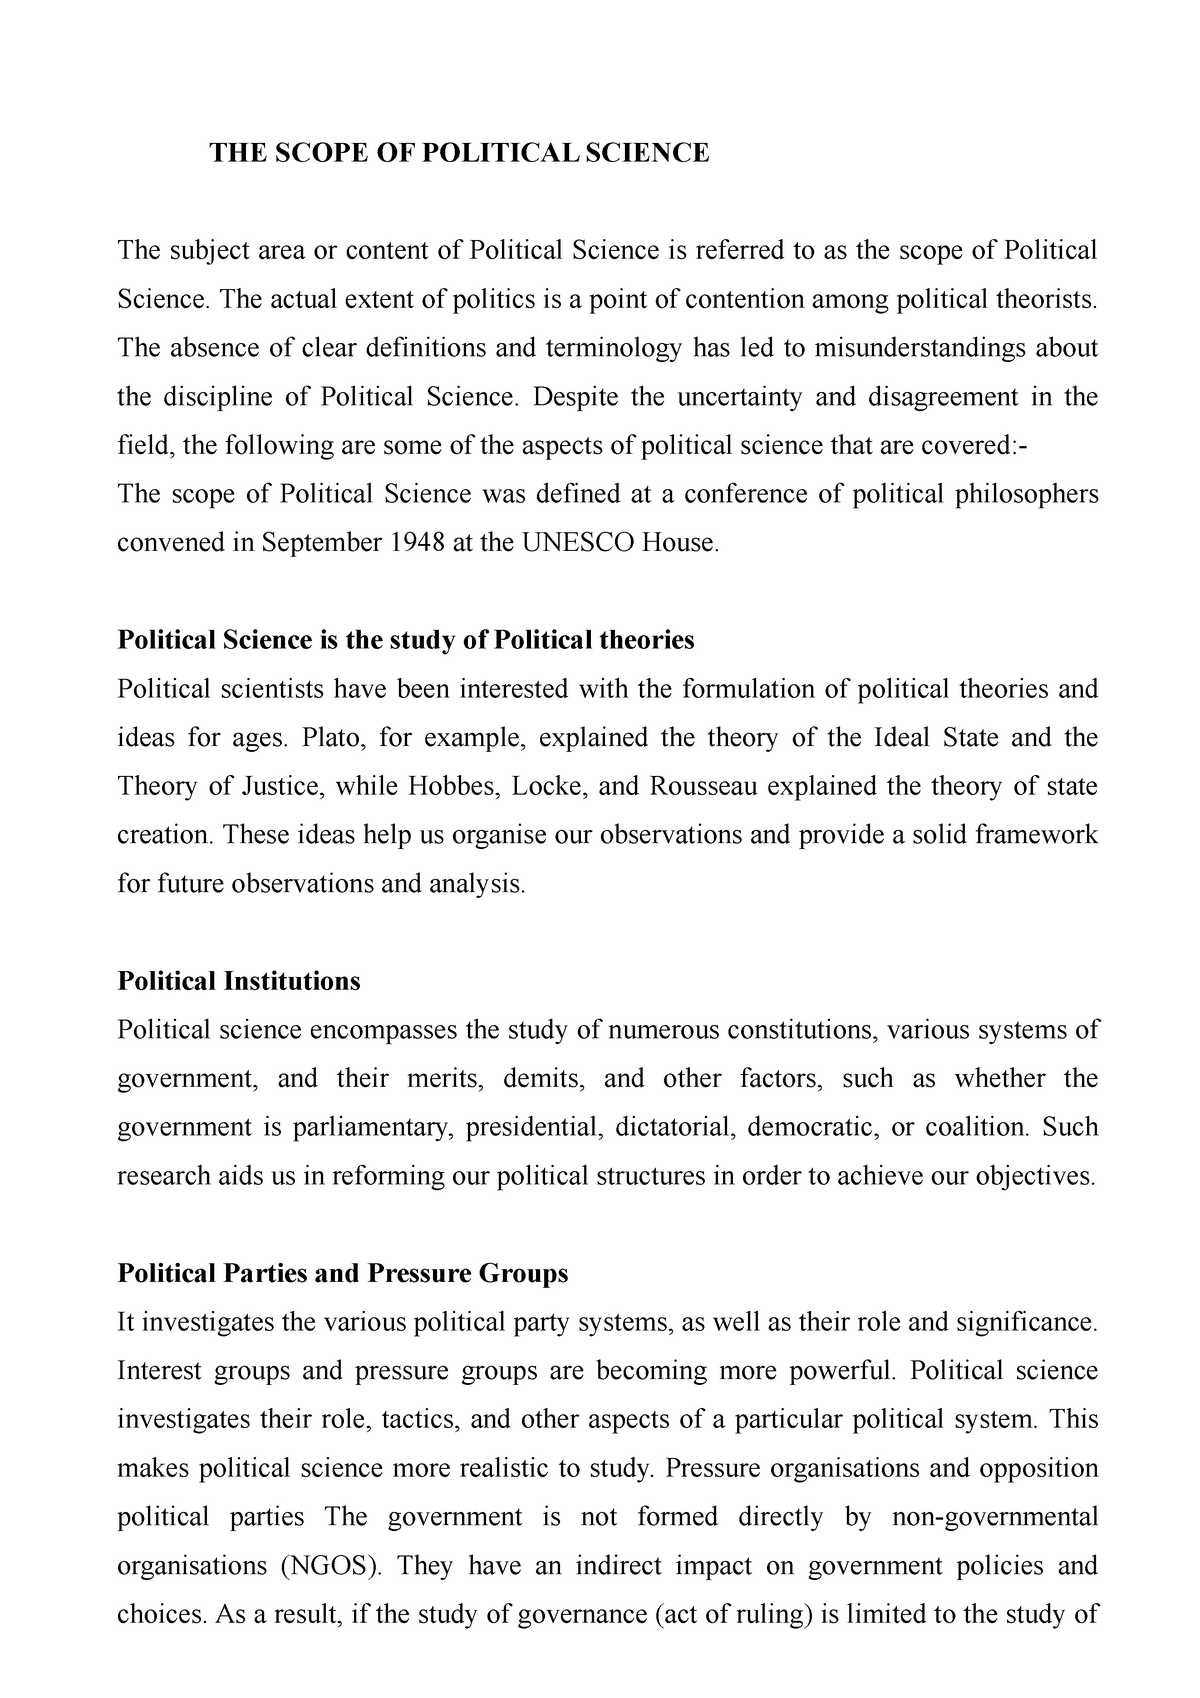 master thesis political science pdf